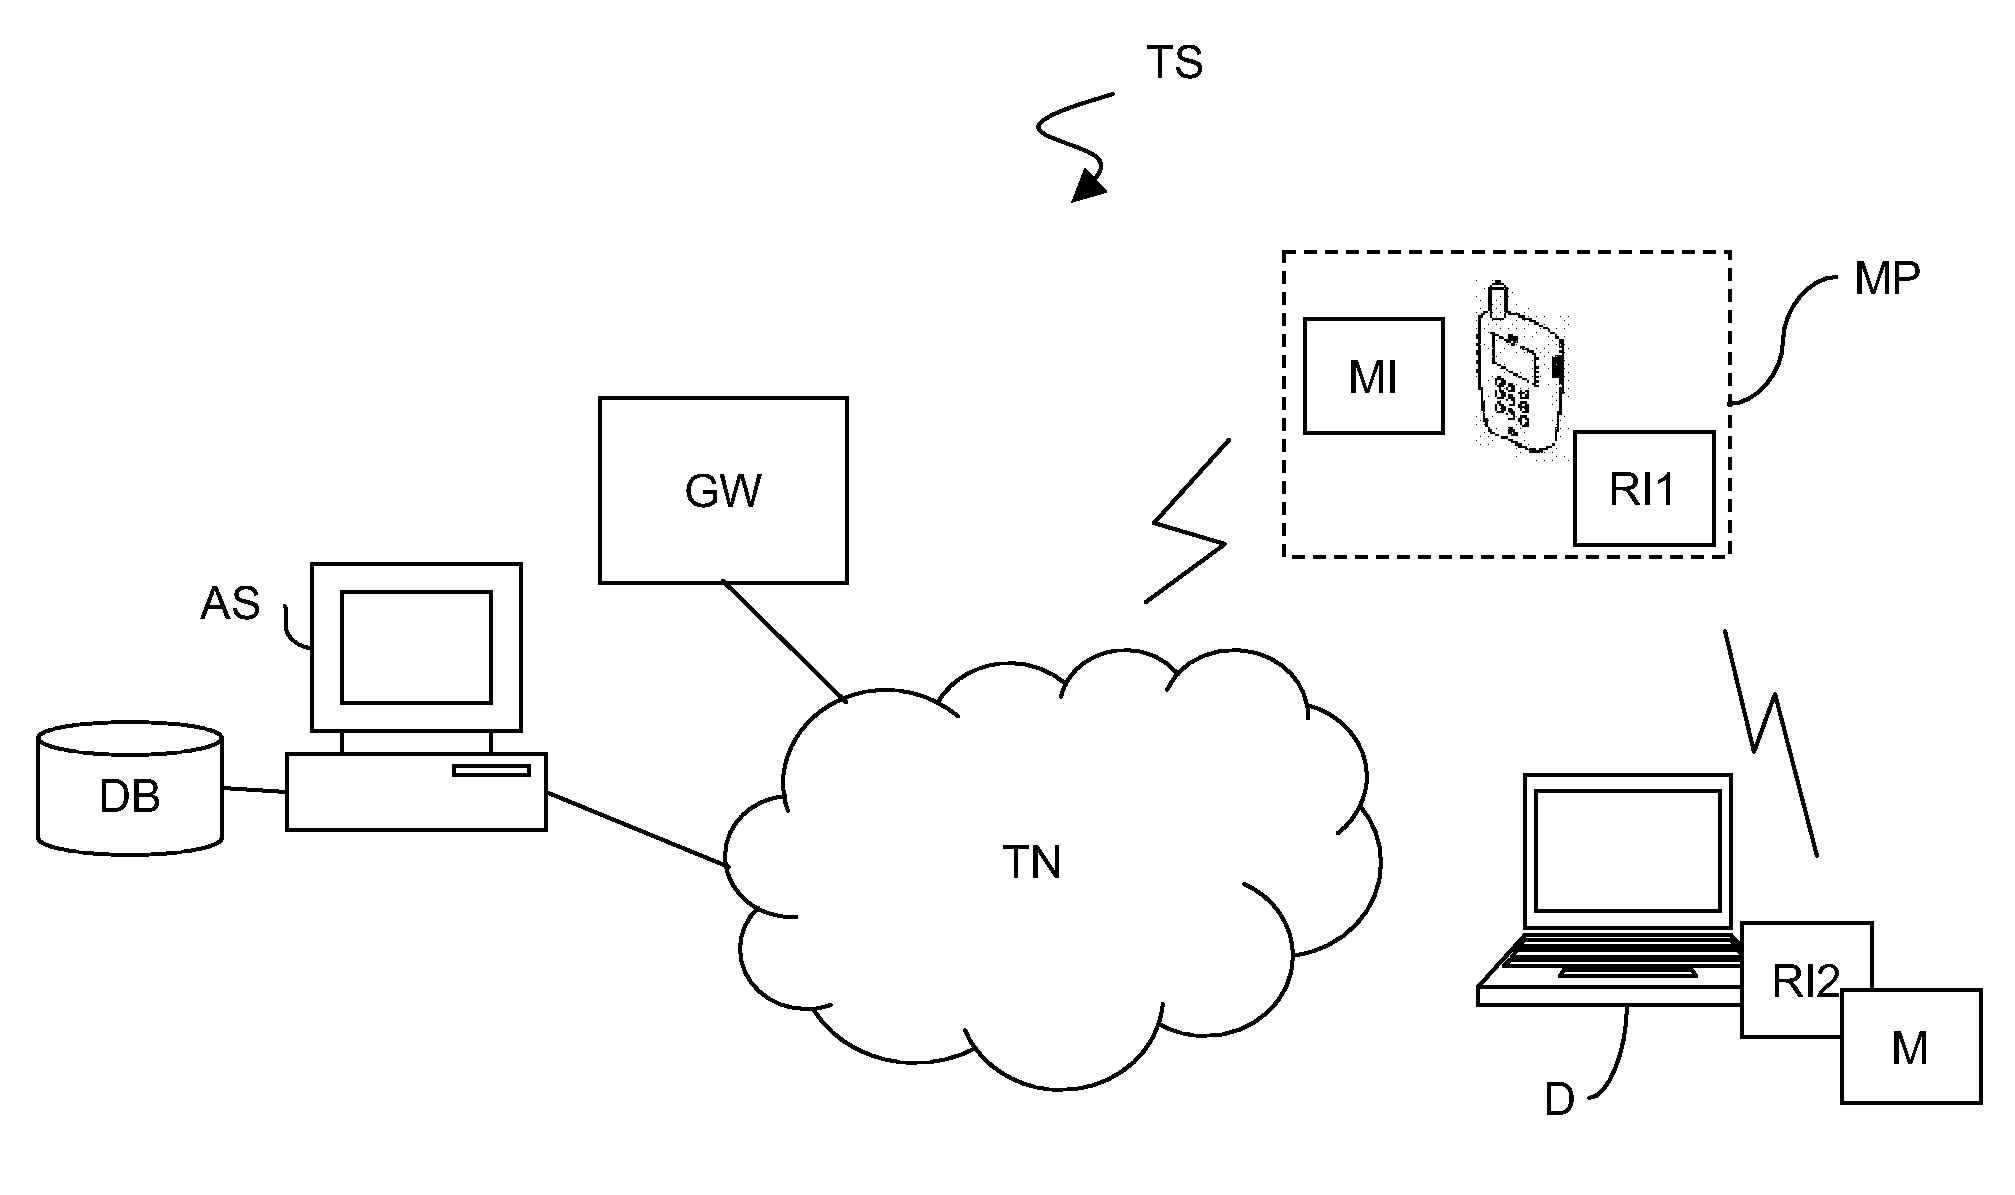 Association of a mobile user identifier and a radio identifier of a mobile phone